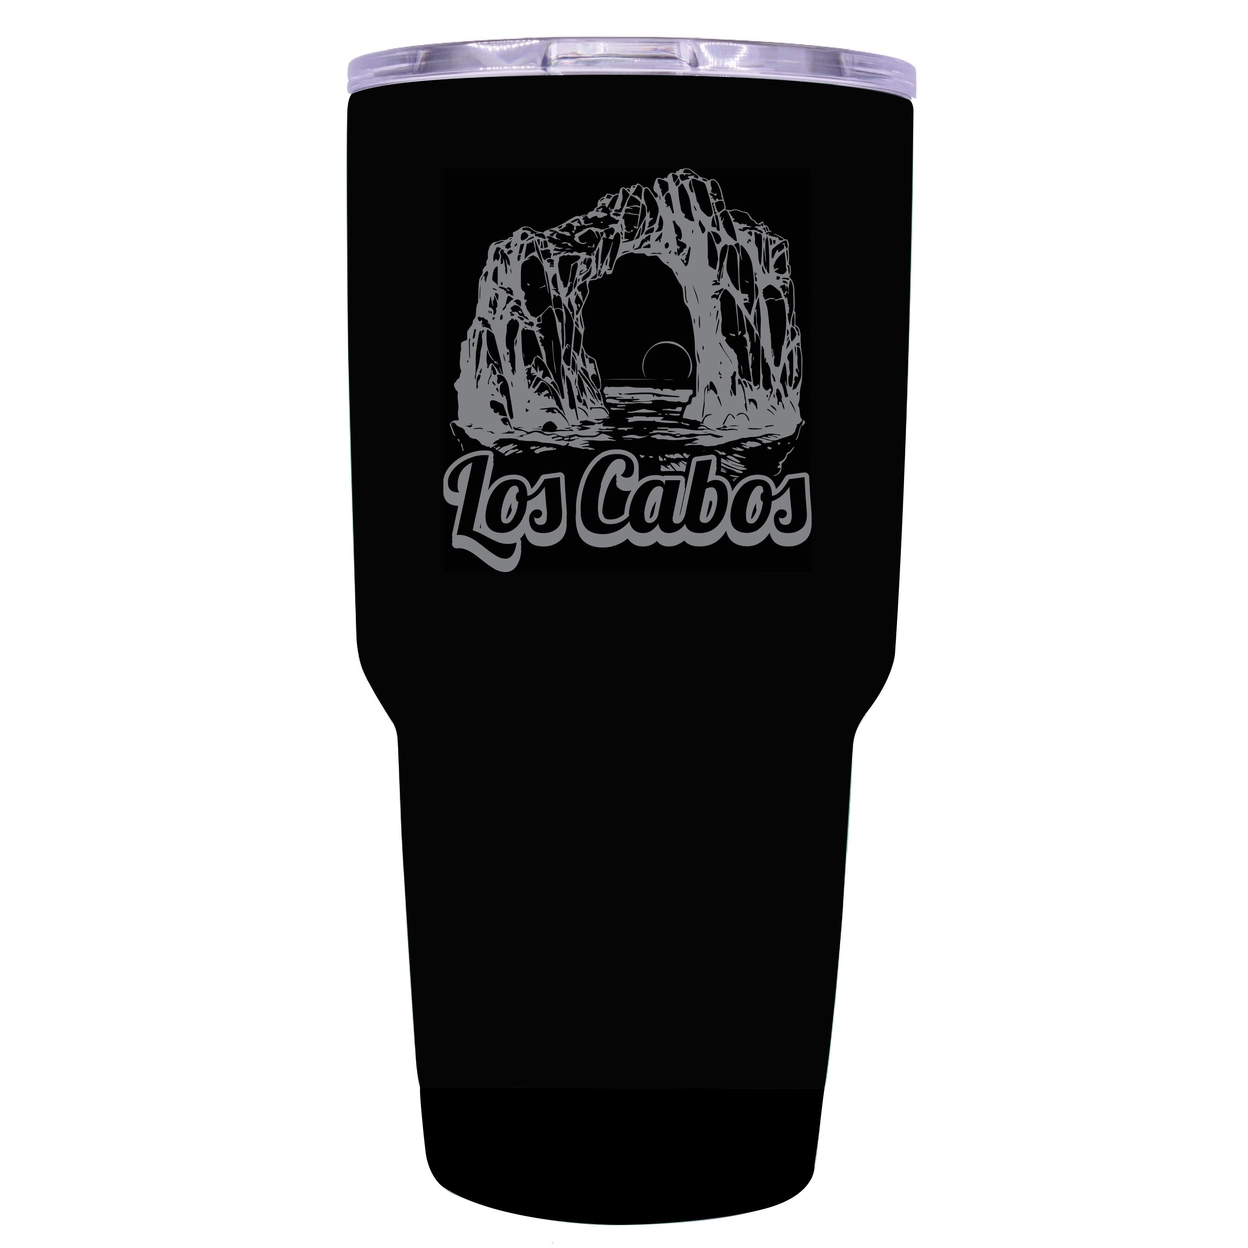 Los Cabos Mexico Souvenir 24 Oz Engraved Insulated Stainless Steel Tumbler - Black,,2-Pack